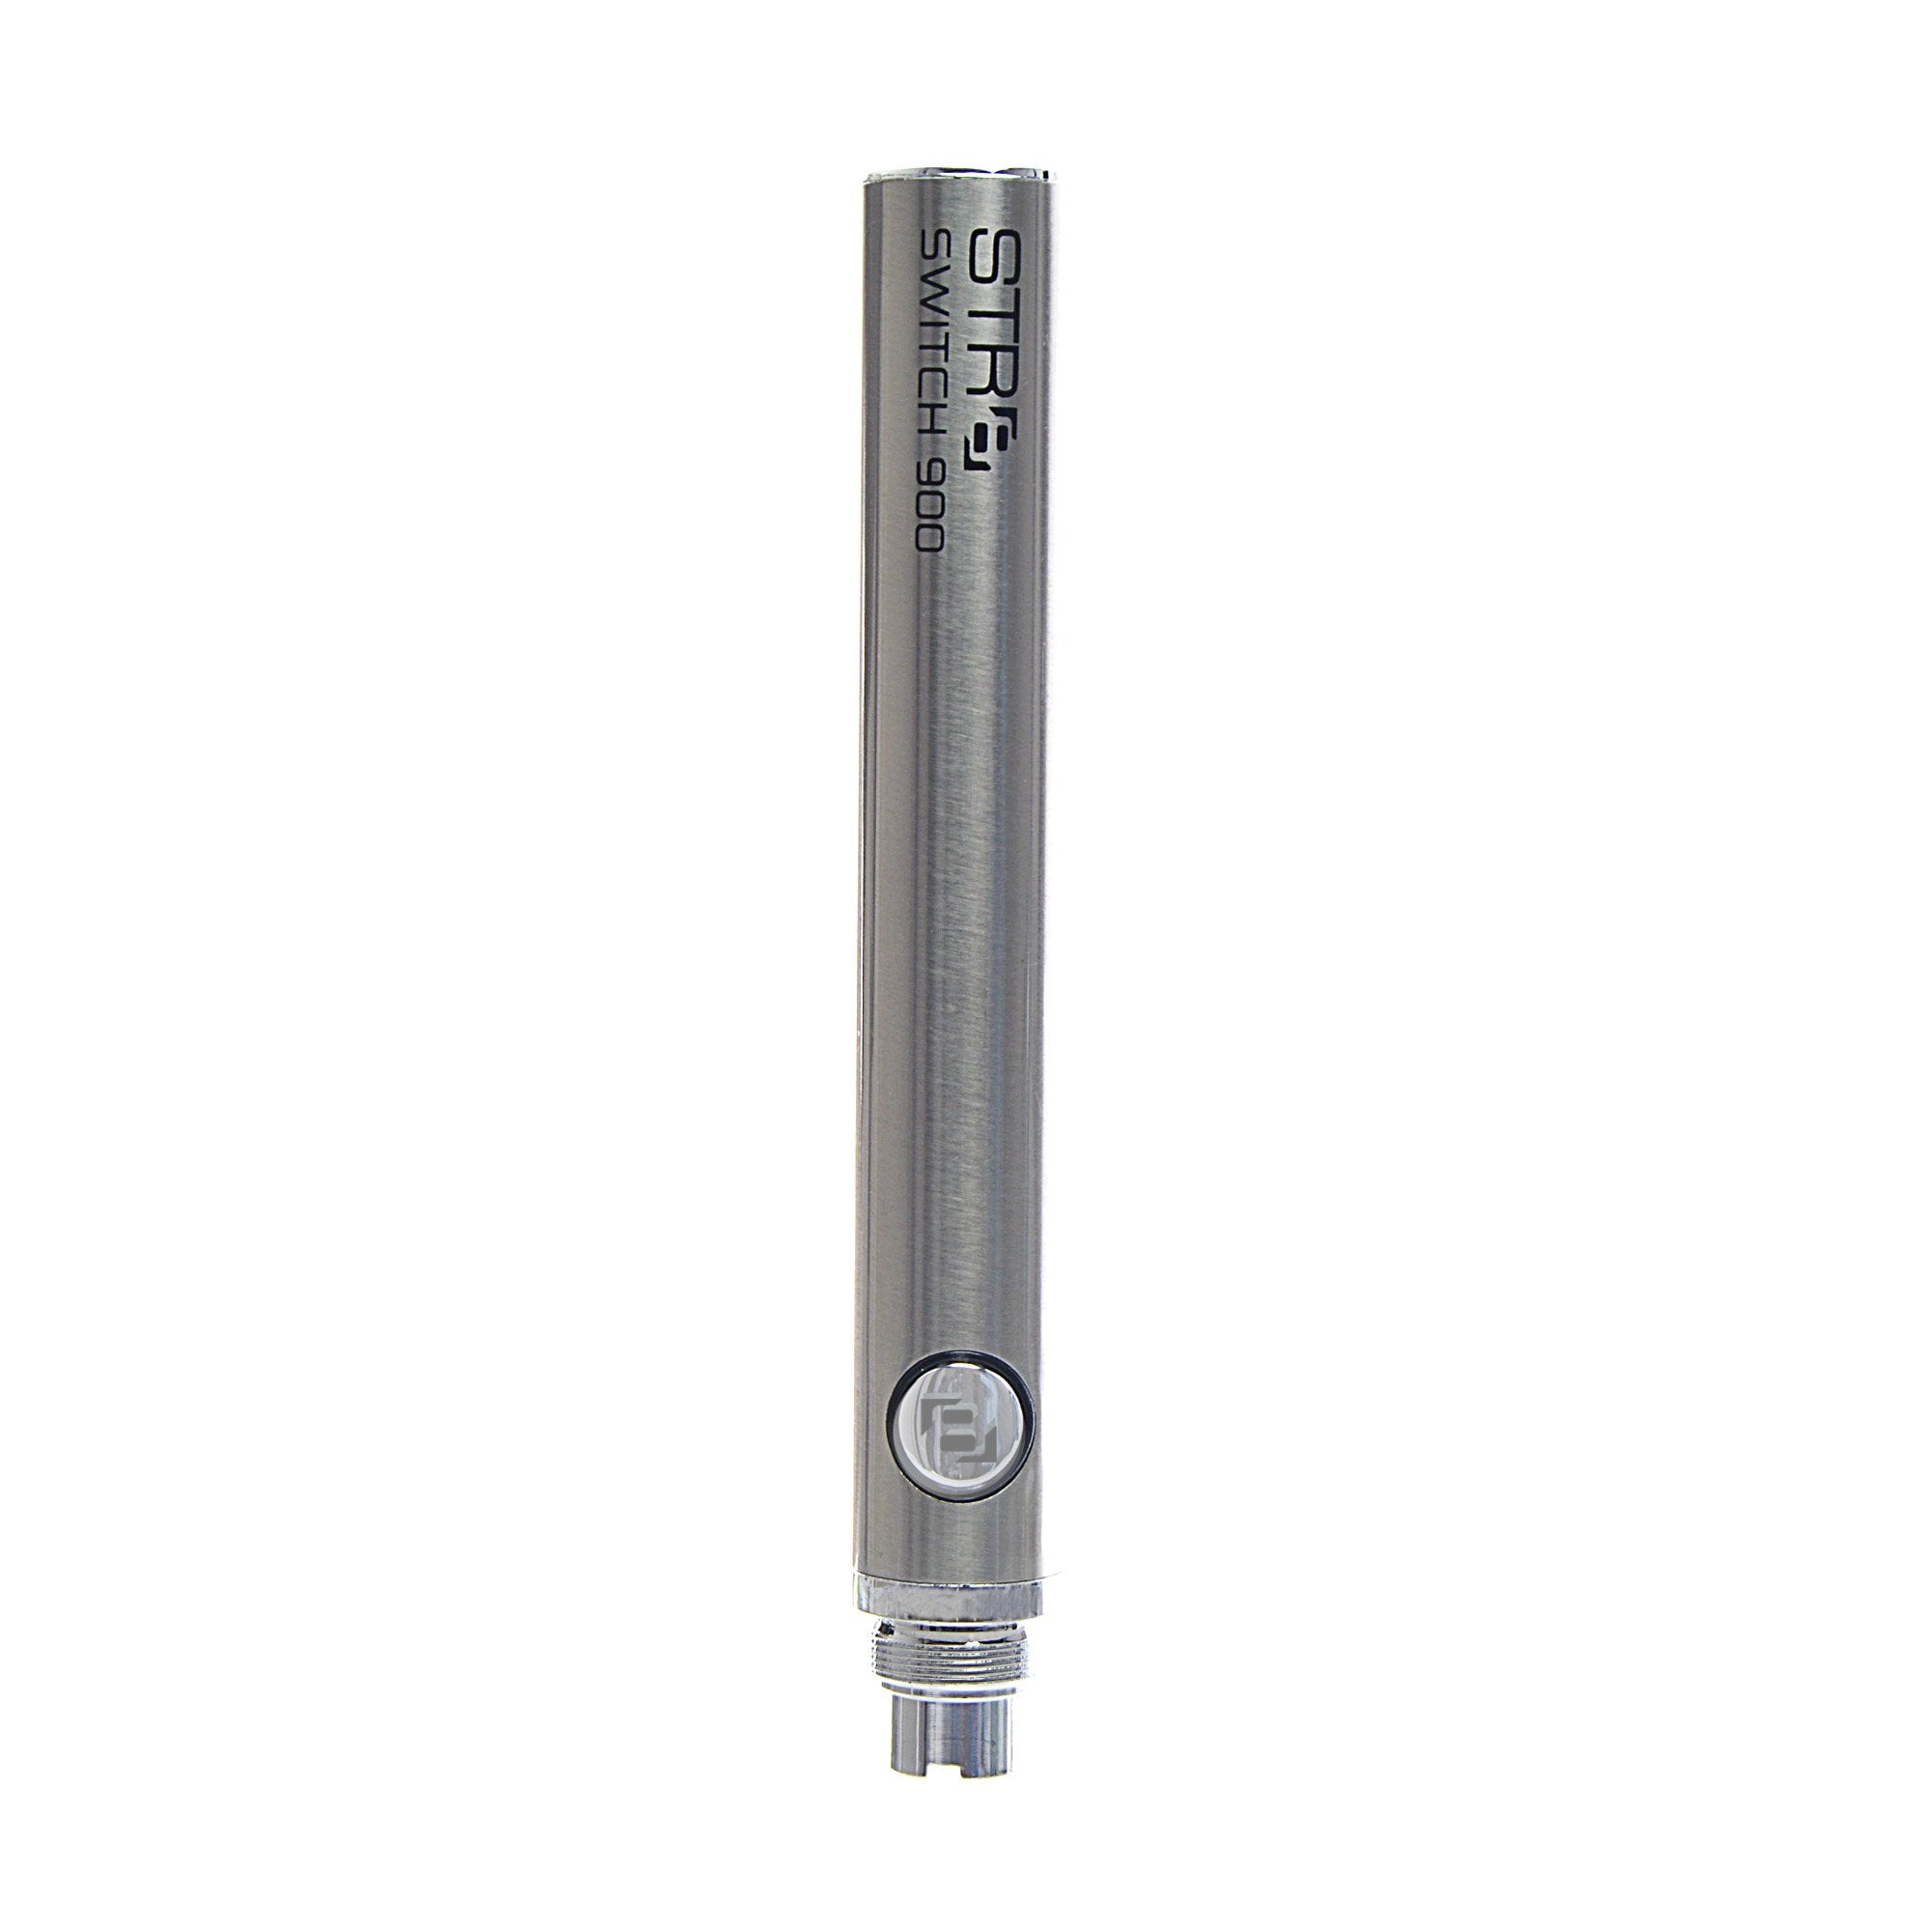 STR8 | 'Retail Display' EVOD Batteries | Switch/Revolve - Mixed - 24 Count - 5